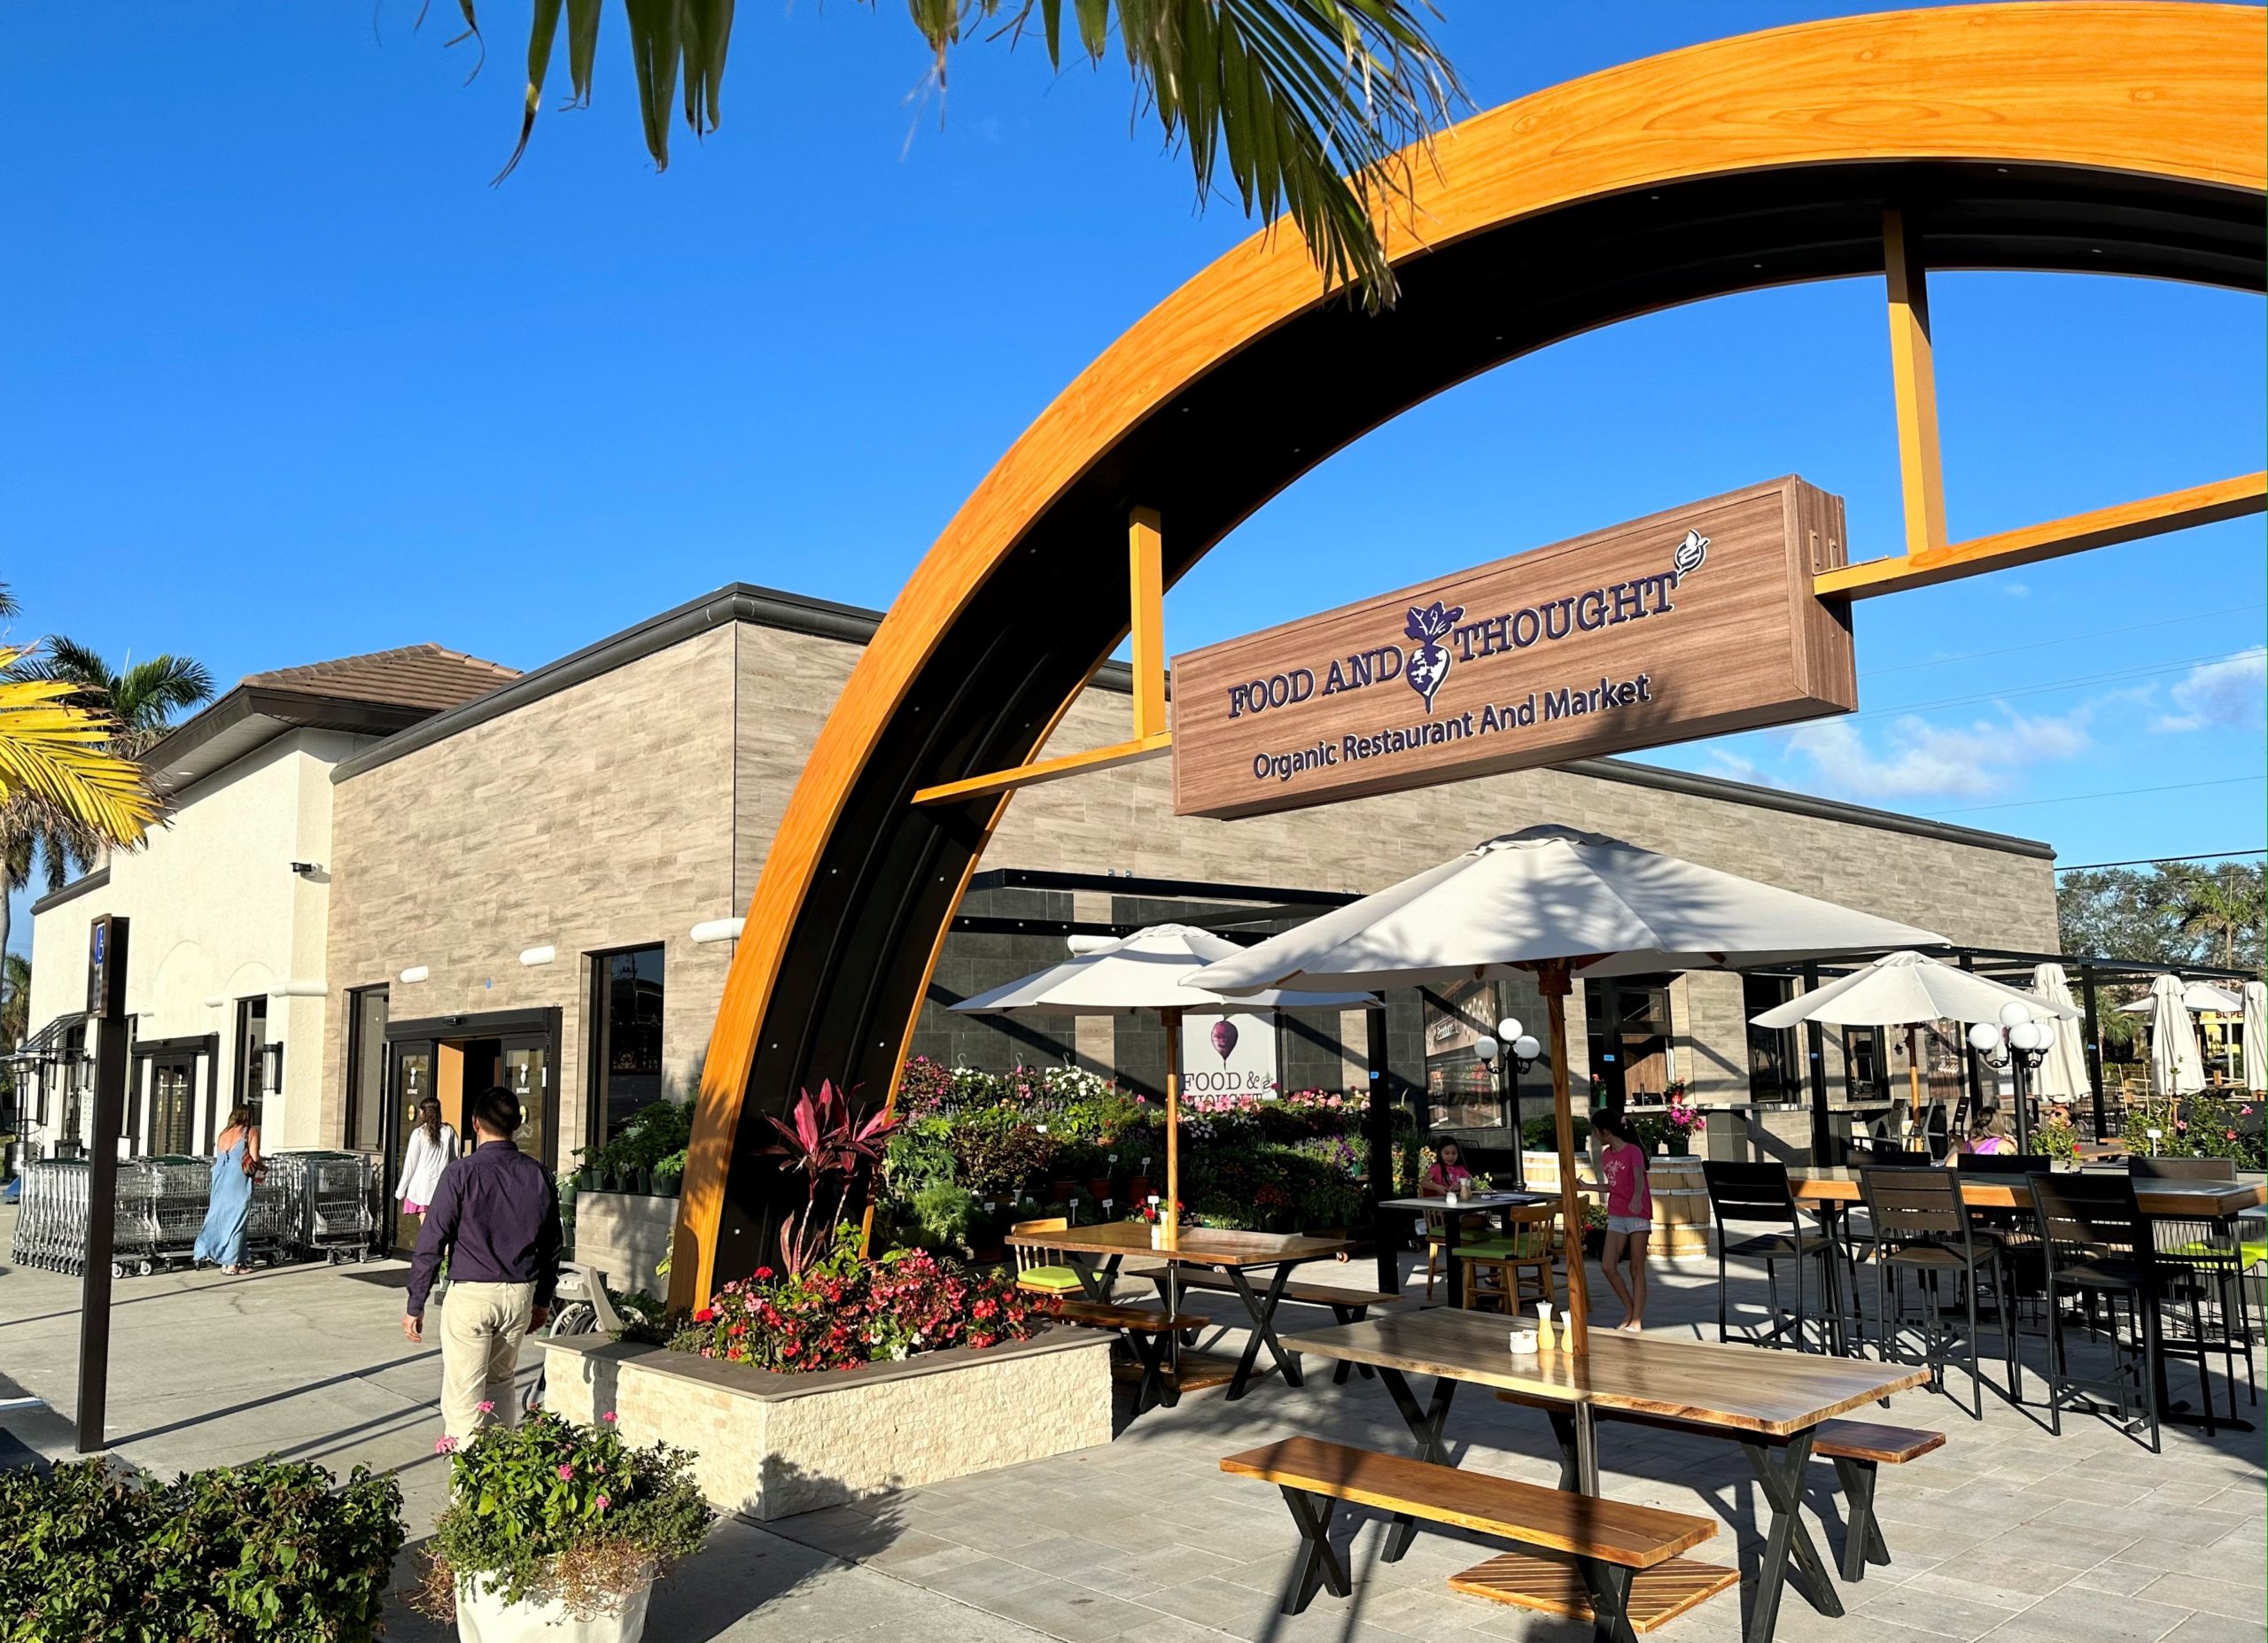 Food & Thought 2 organic market opens in North Naples